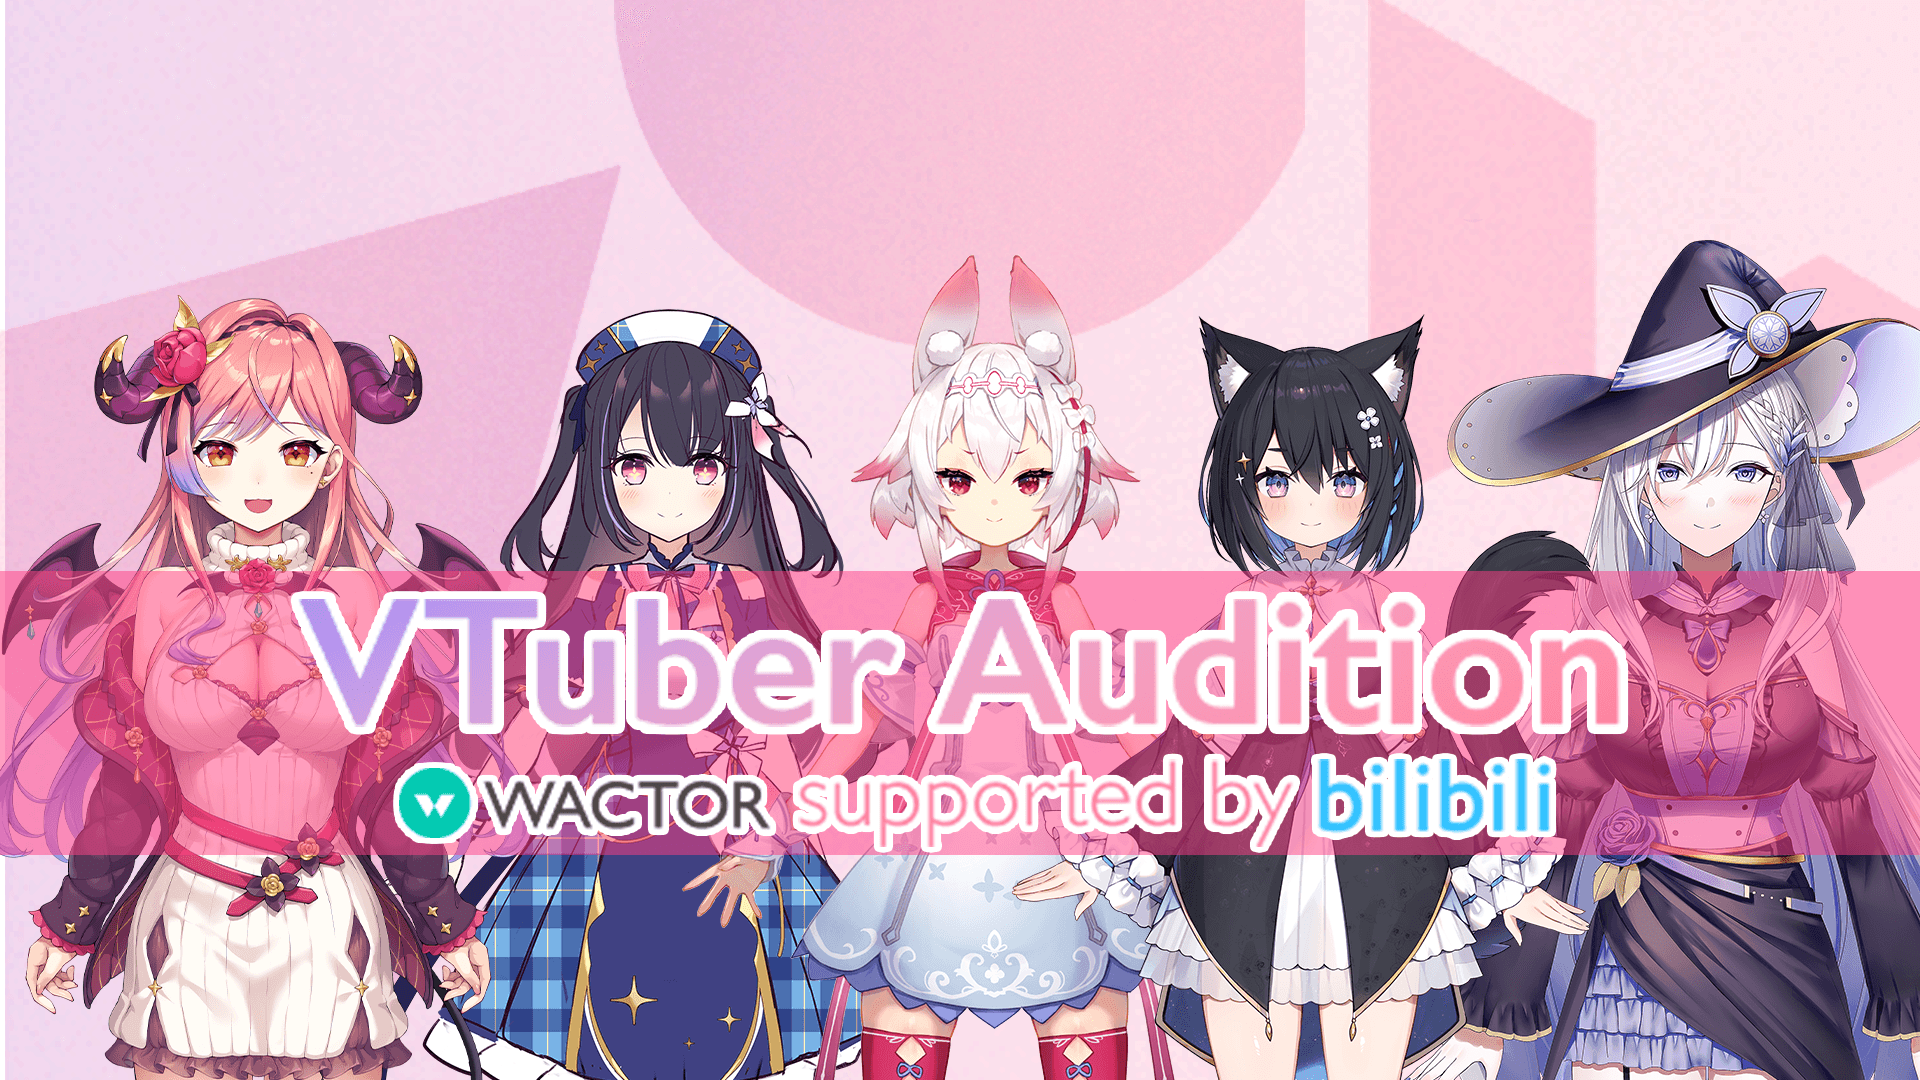 wactor-vtuber-audition-supported-by-bilibili-1